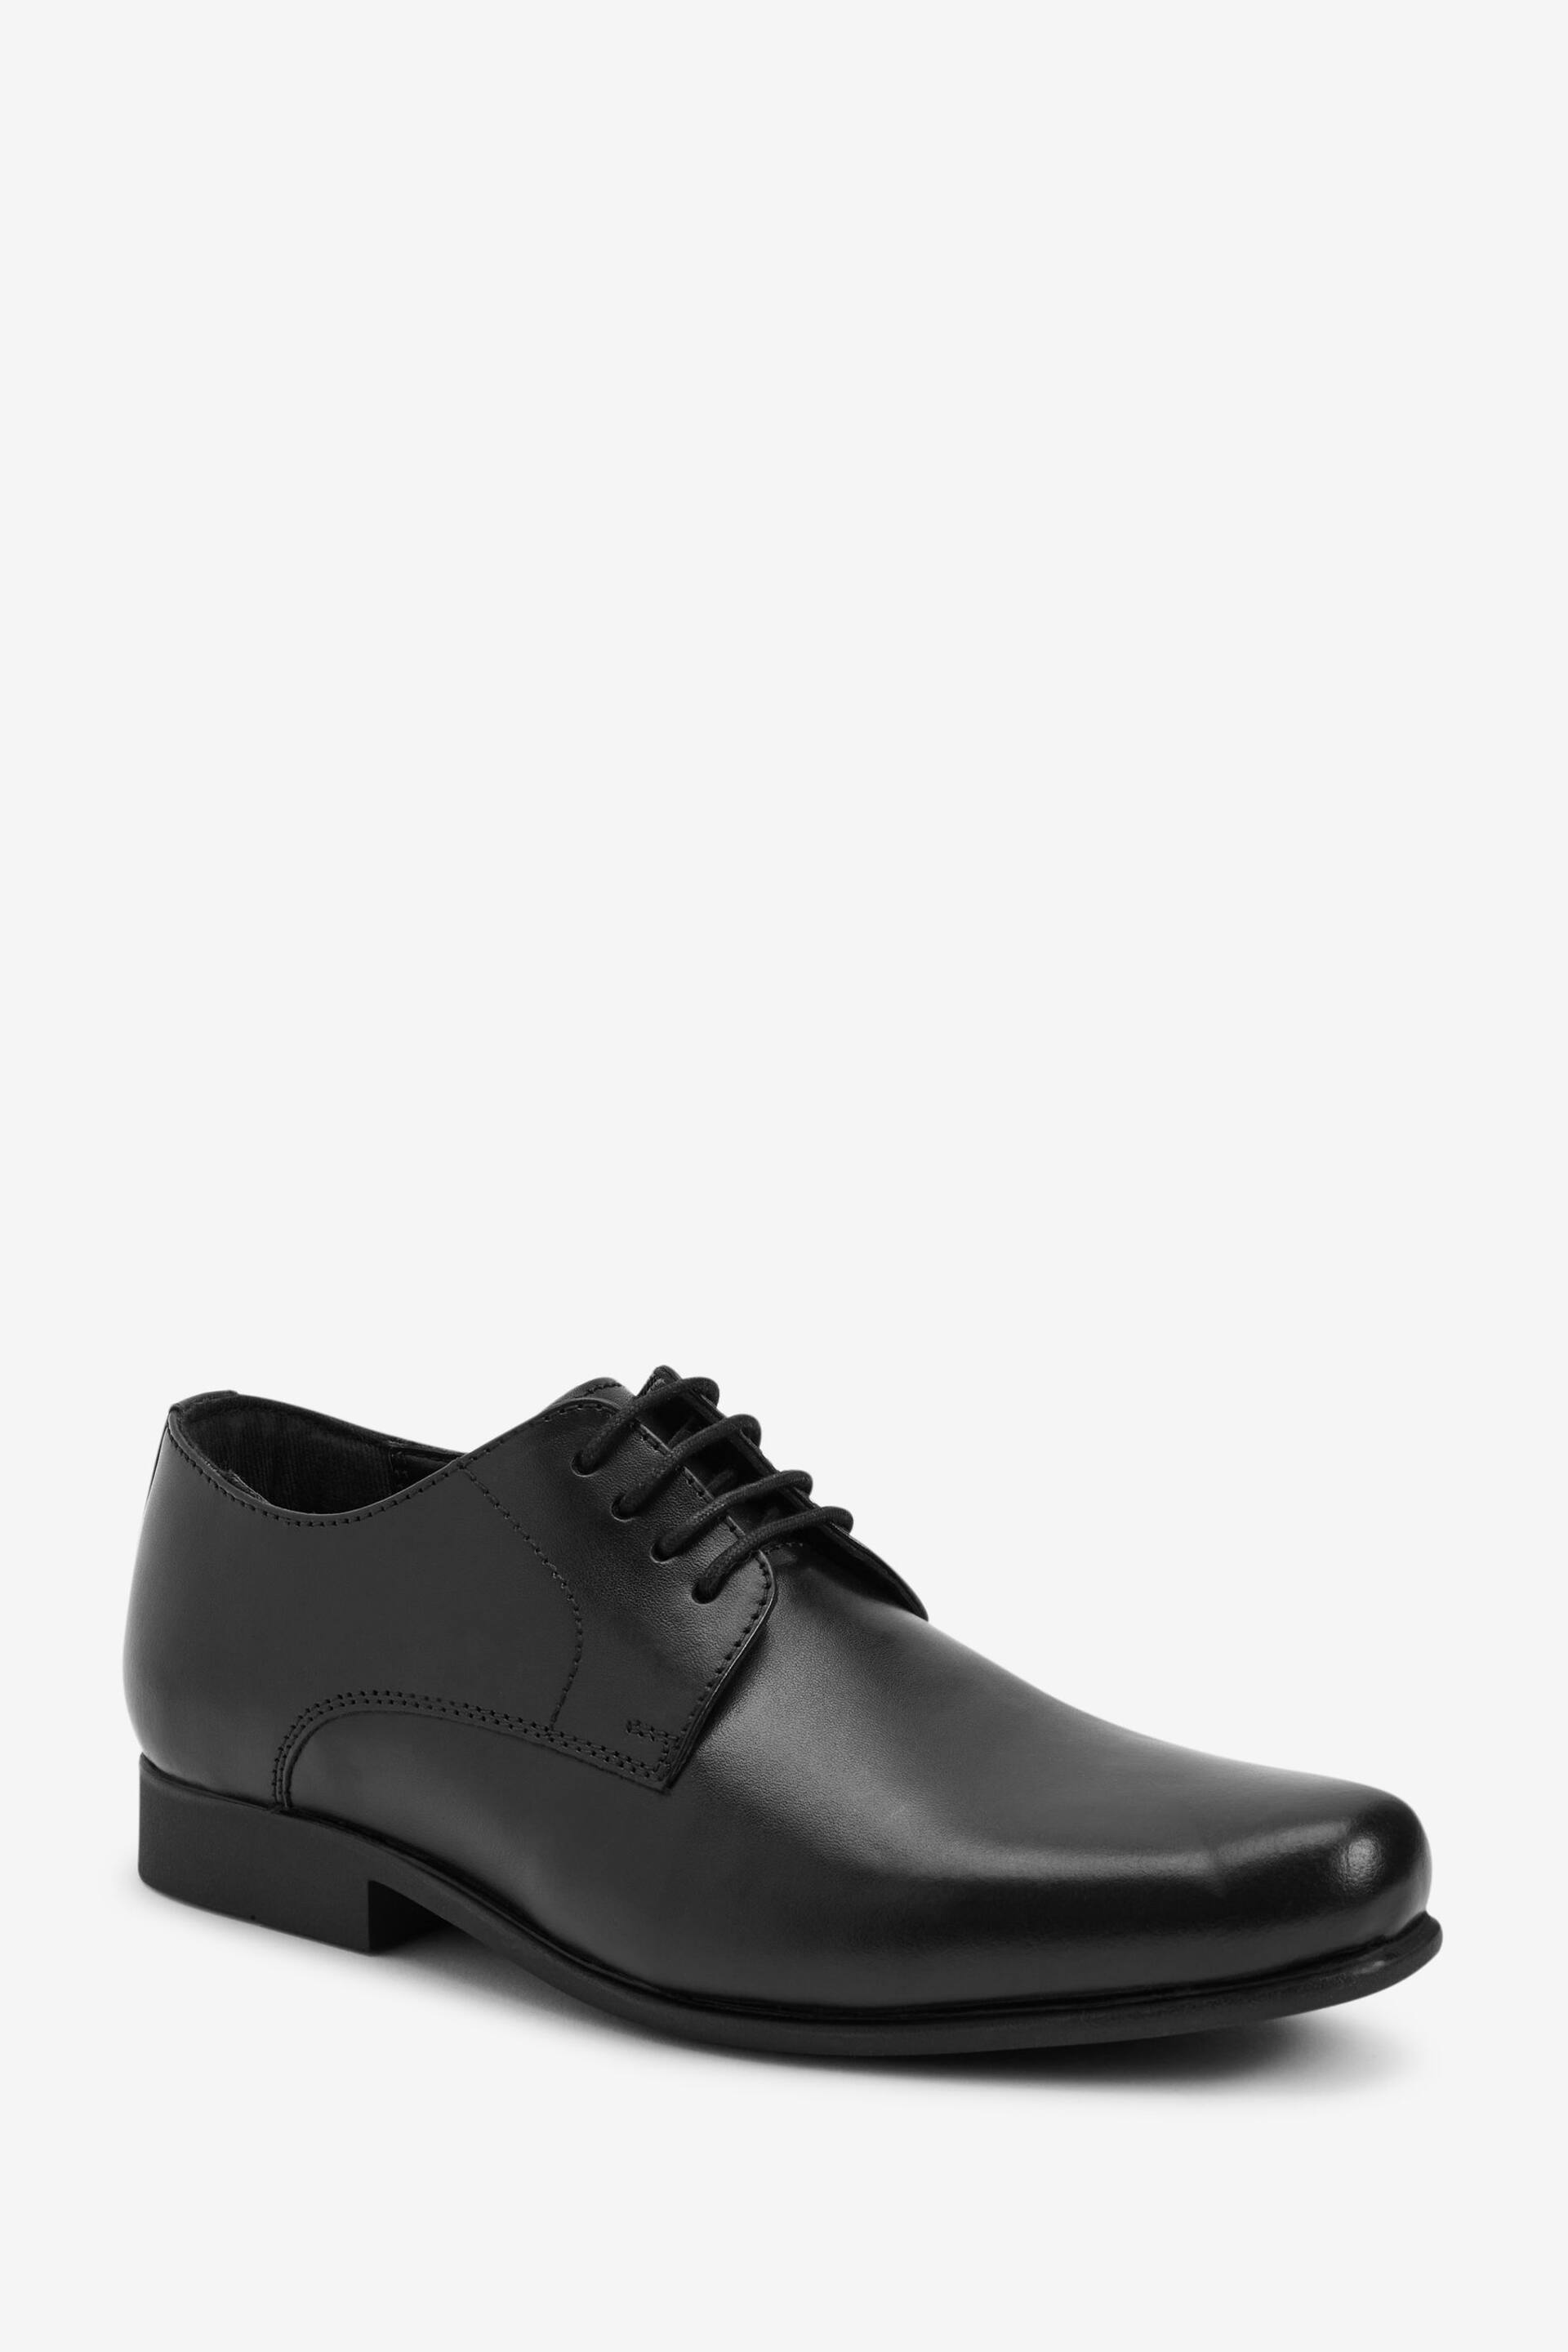 Black Wide Fit (G) School Leather Lace Up Shoes - Image 3 of 9